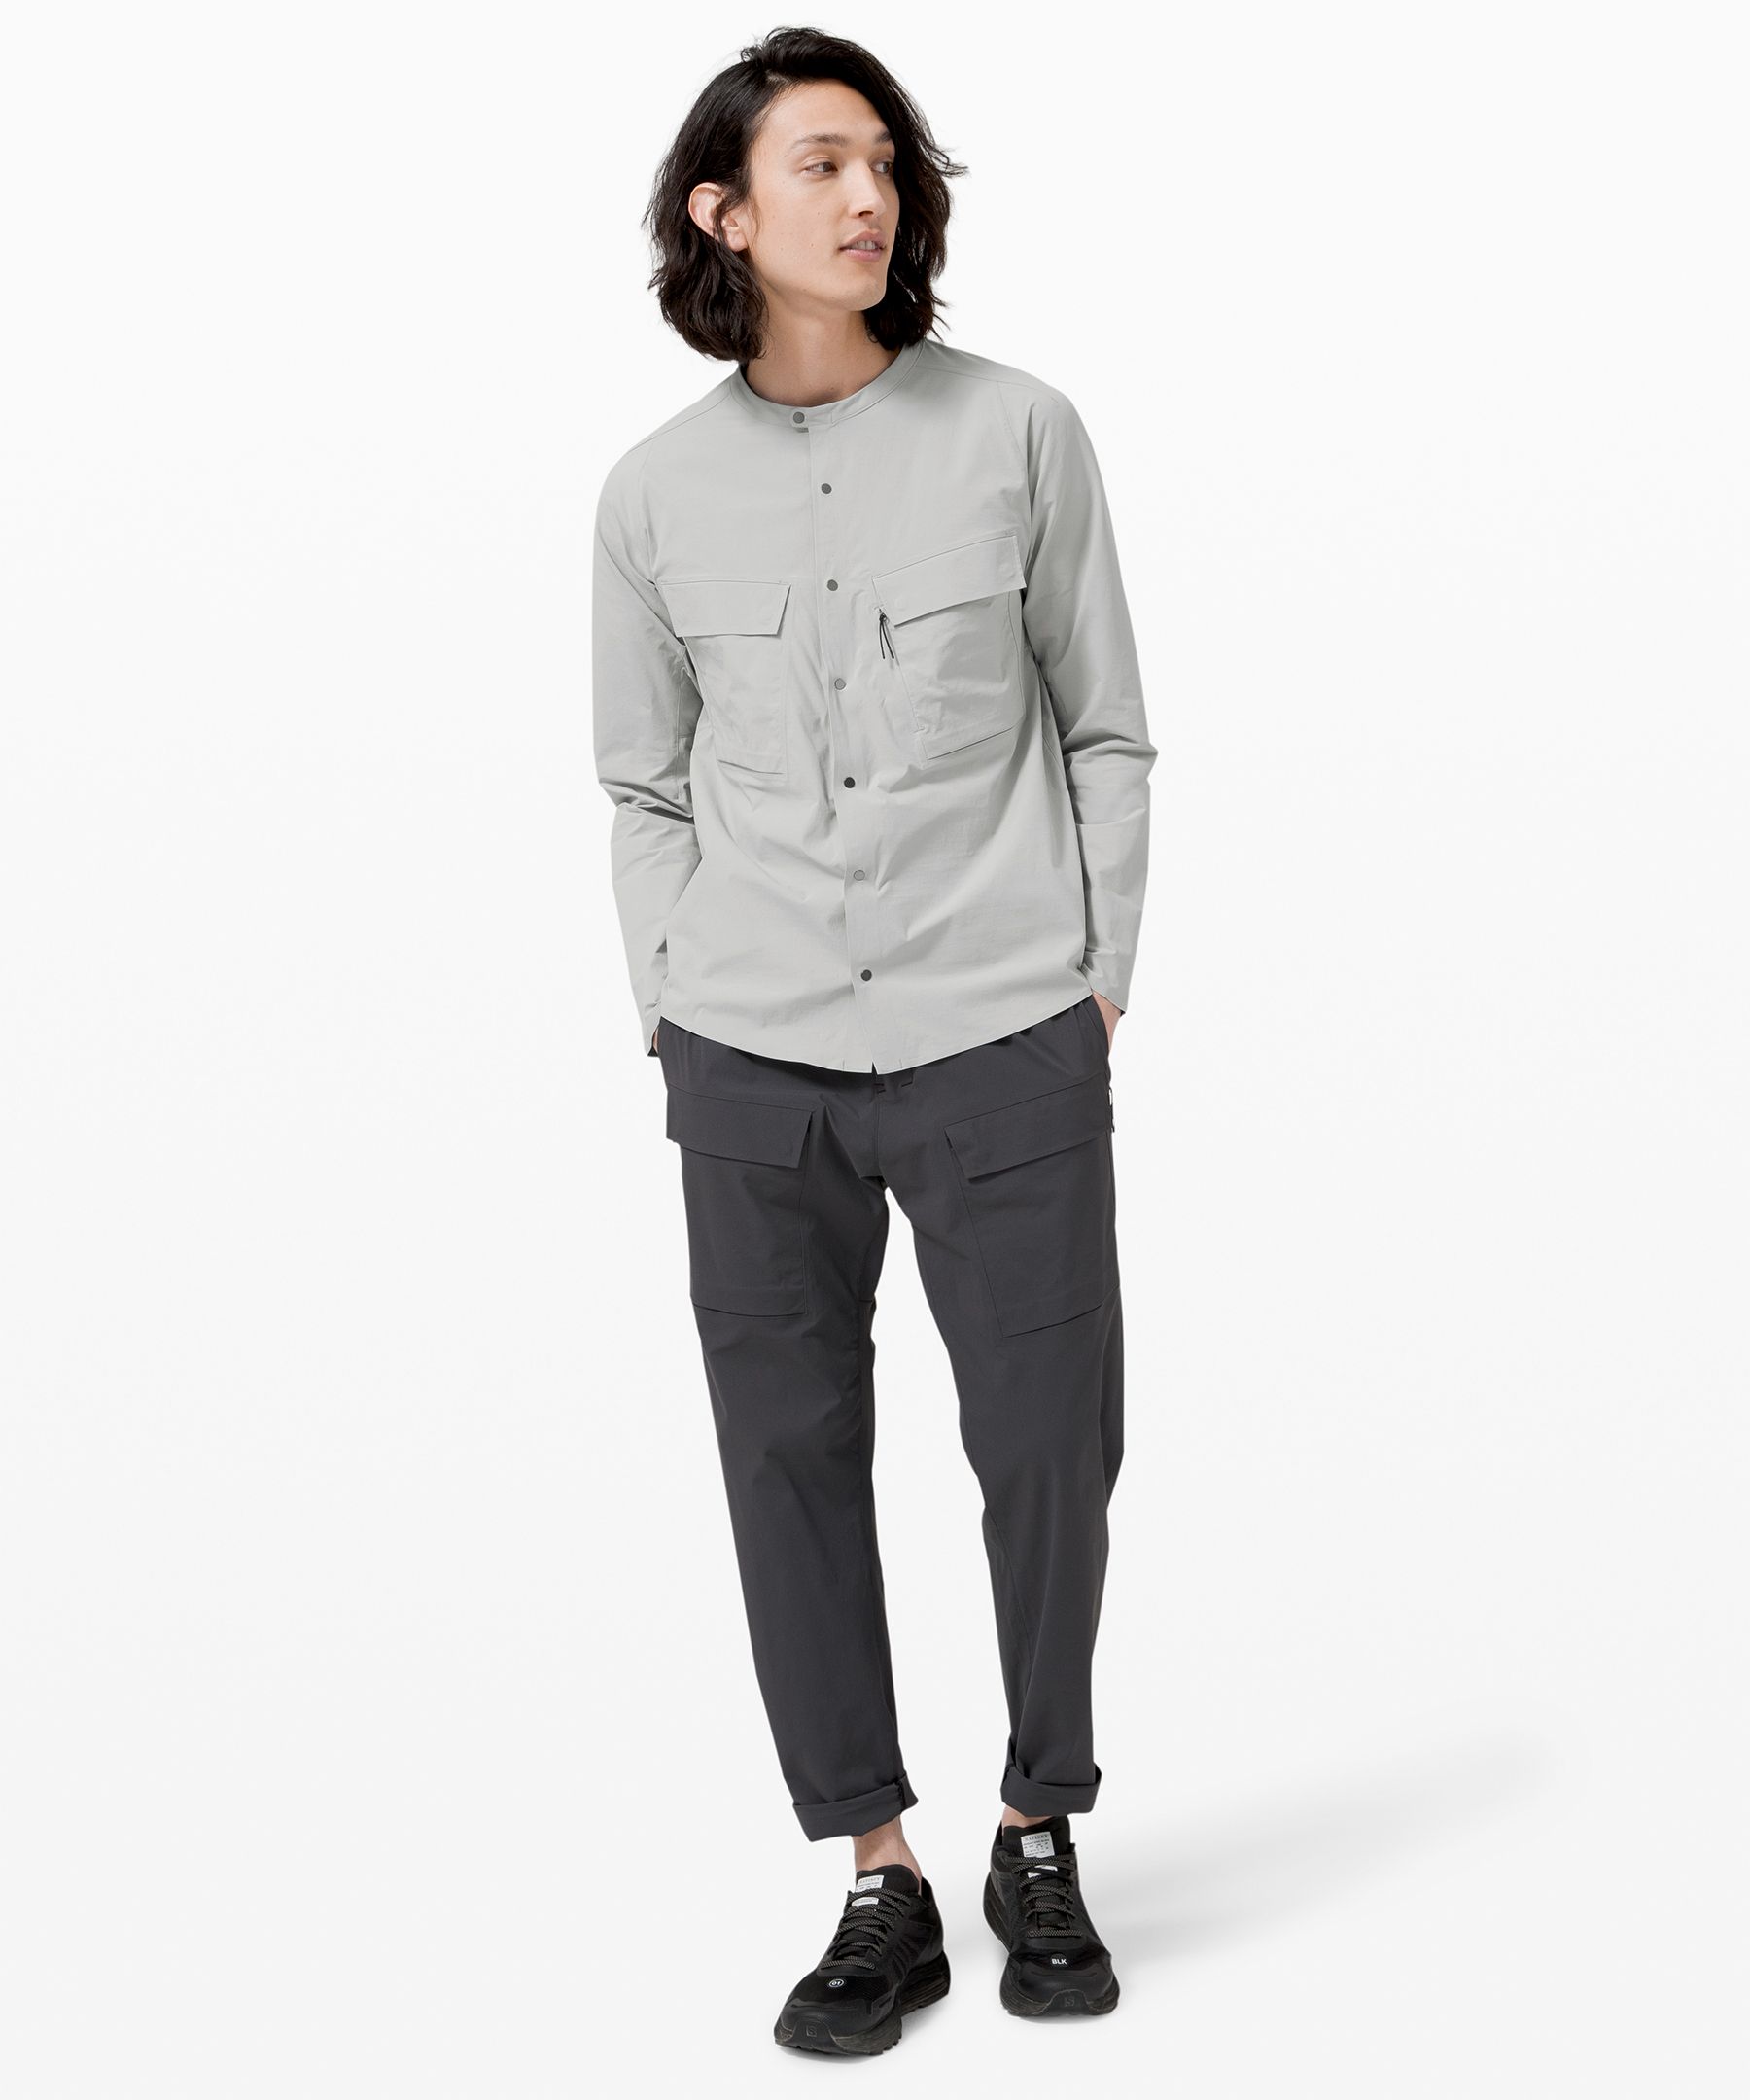 Lululemon Confluence Snapdown * Lab In Grey